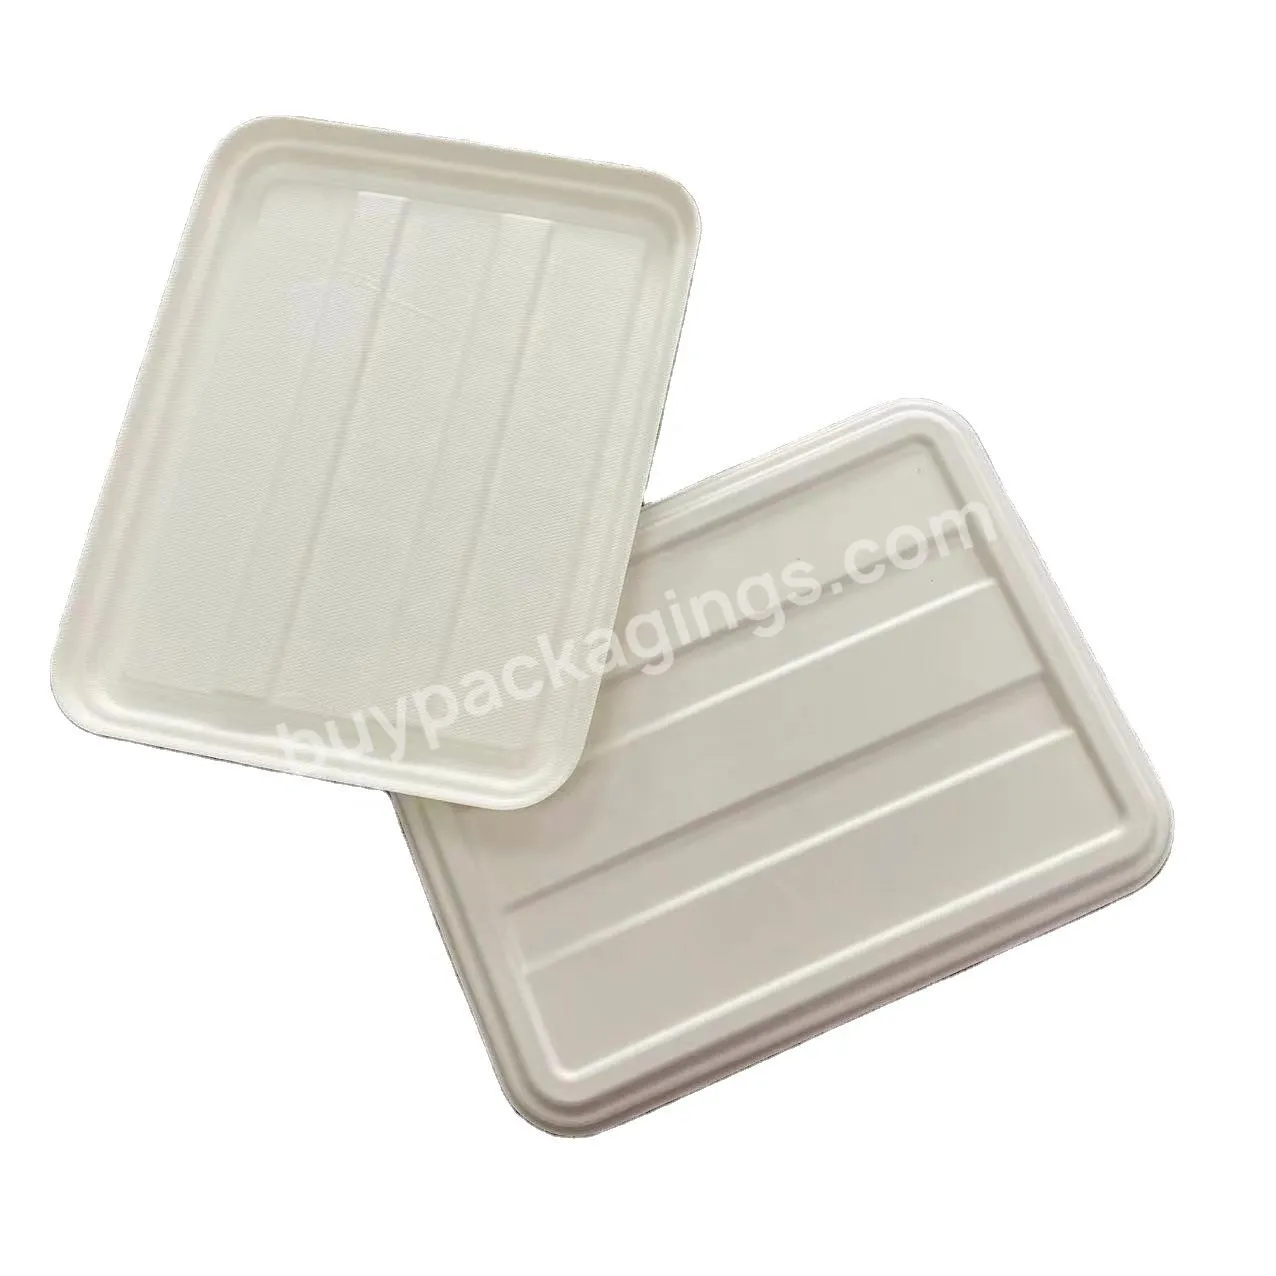 Luxury Airtight Takeaway Food Storage Containers Paper Box Plate Serving Tray With Bamboo Lids And Cover - Buy Airtight Food Storage Containers With Bamboo Lids,Containers With Lids Food,Takeaway Food Paper Box With Lid.